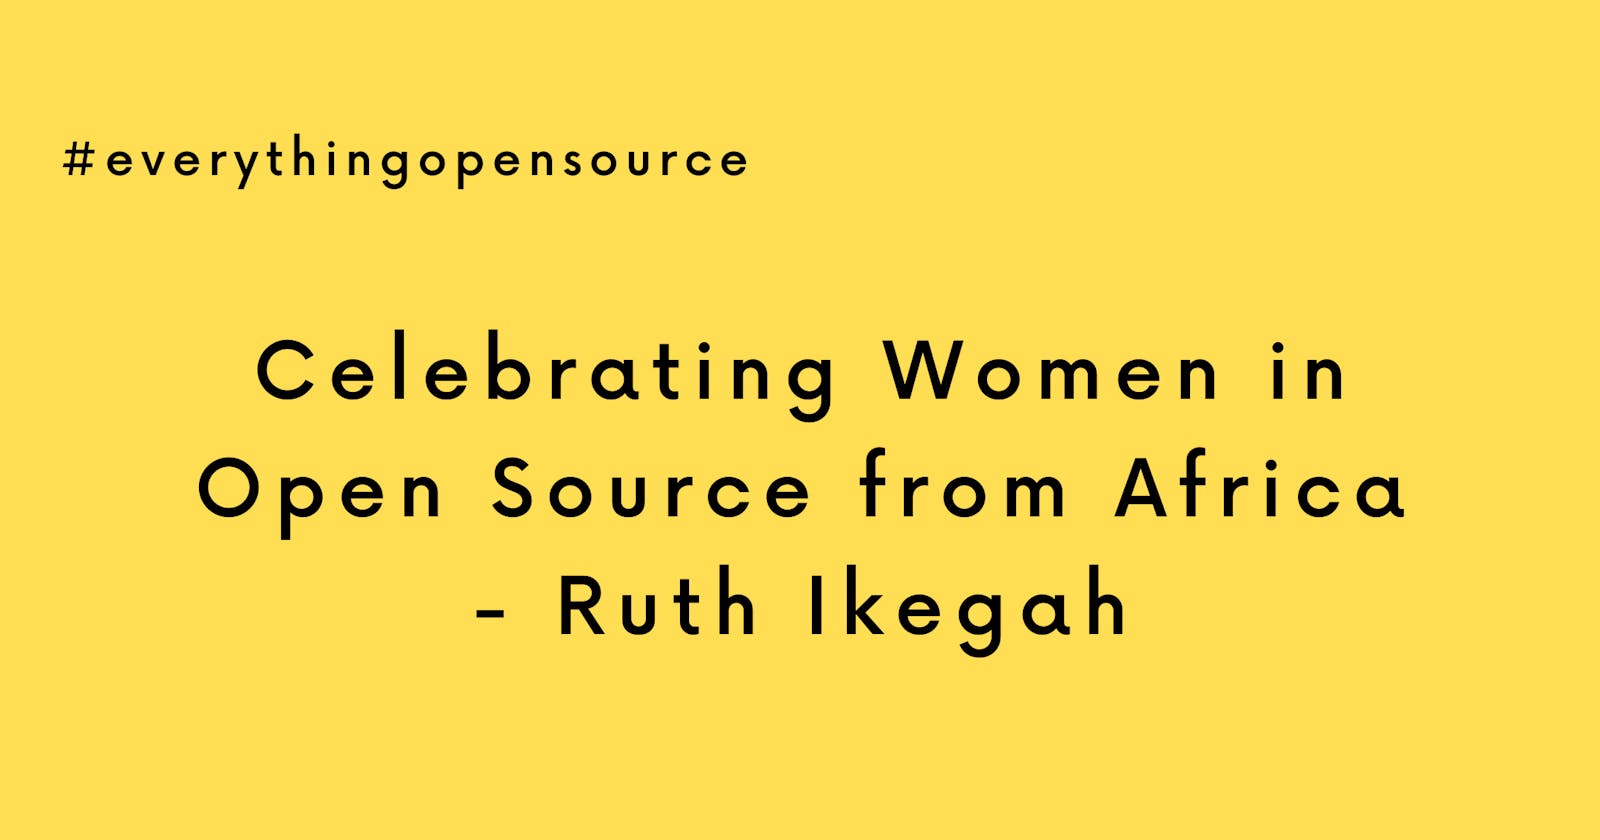 Celebrating Women in Open Source from Africa - Ruth Ikegah